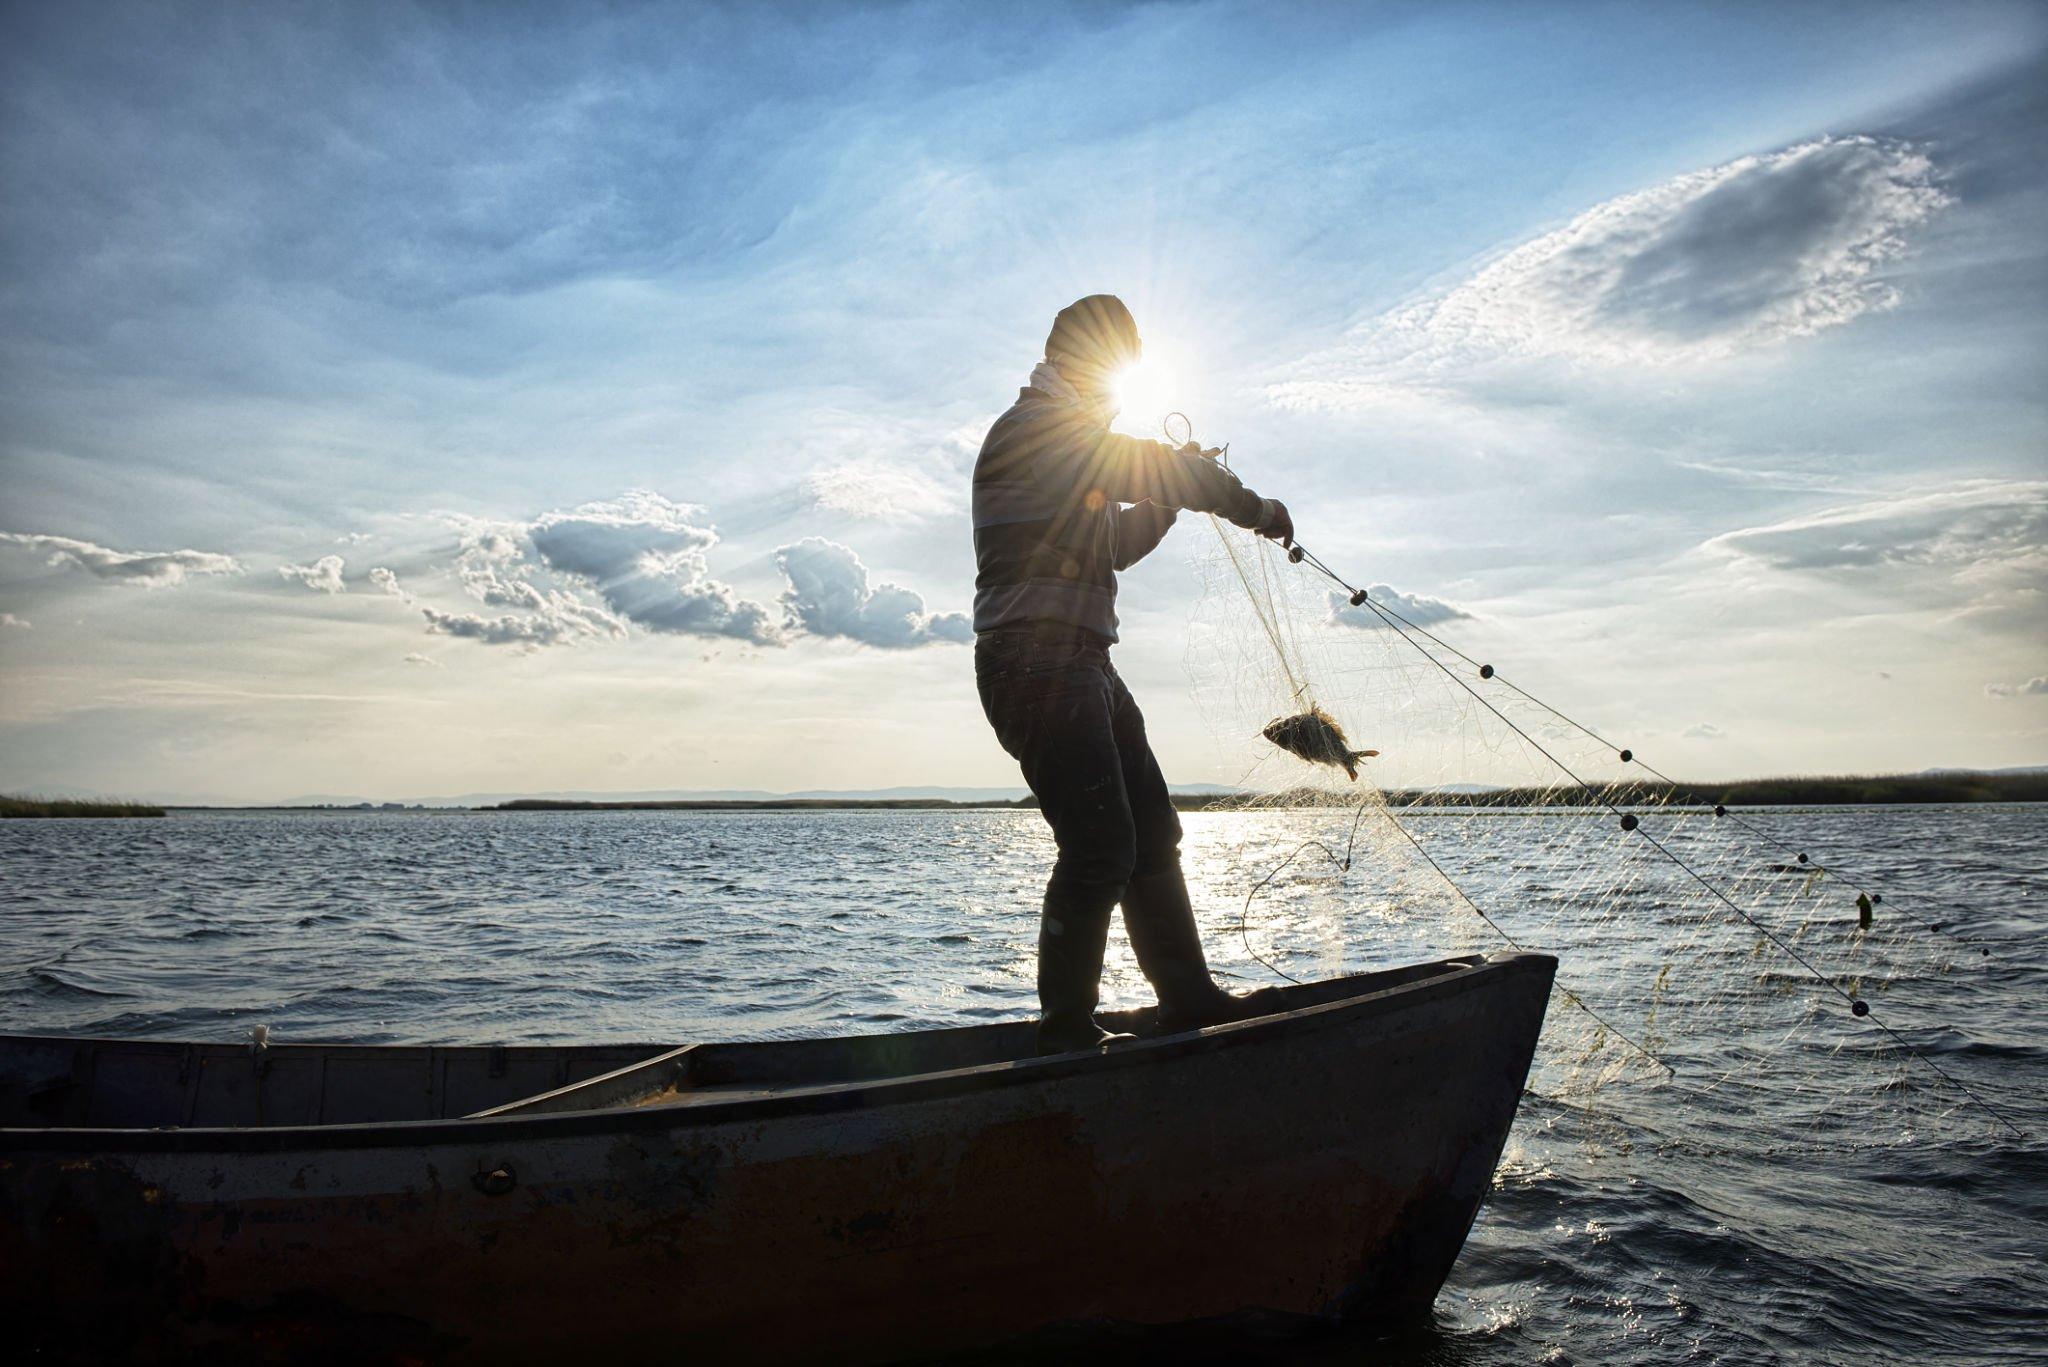 what safety precaution should you take when hunting from a boat?